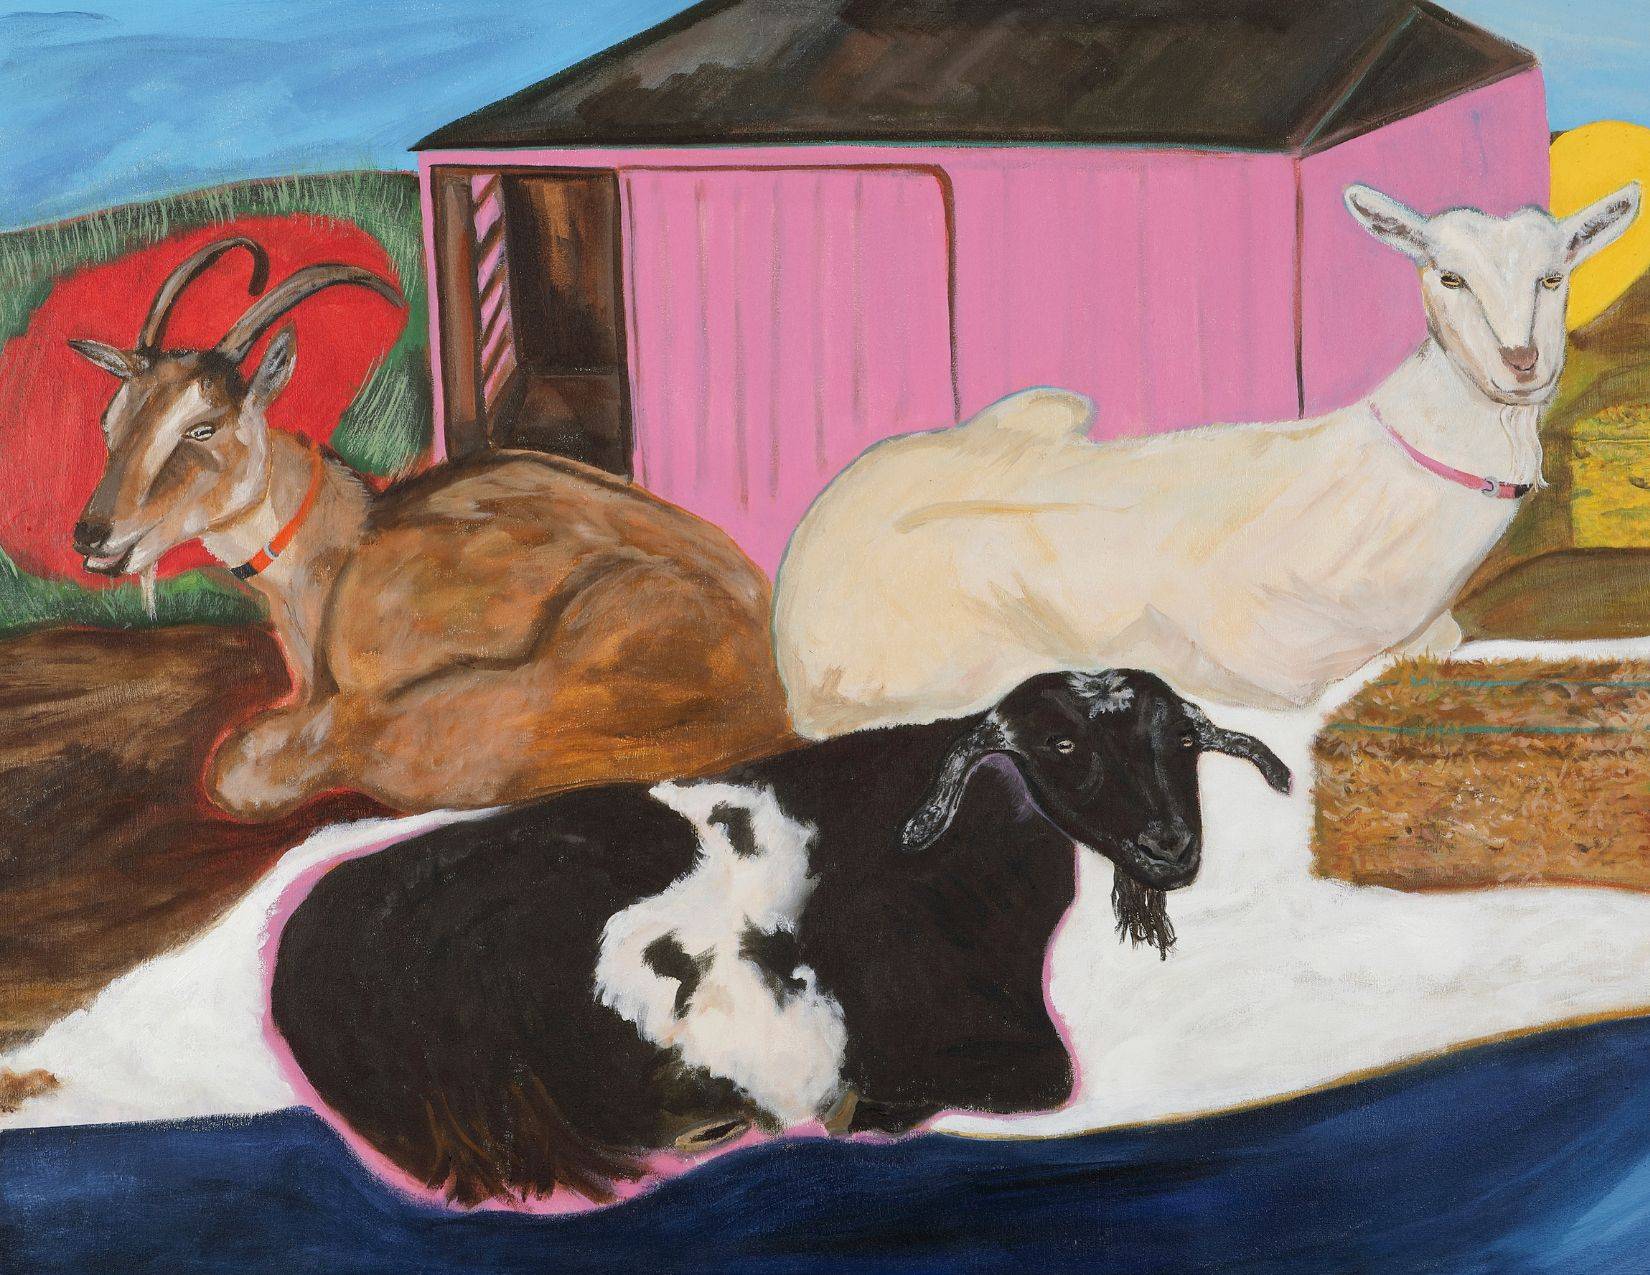 Kandace Creel Falcon's painting, In Rural We Tend to the Herd, and Artists Respond: People, Place, and Prosperity project